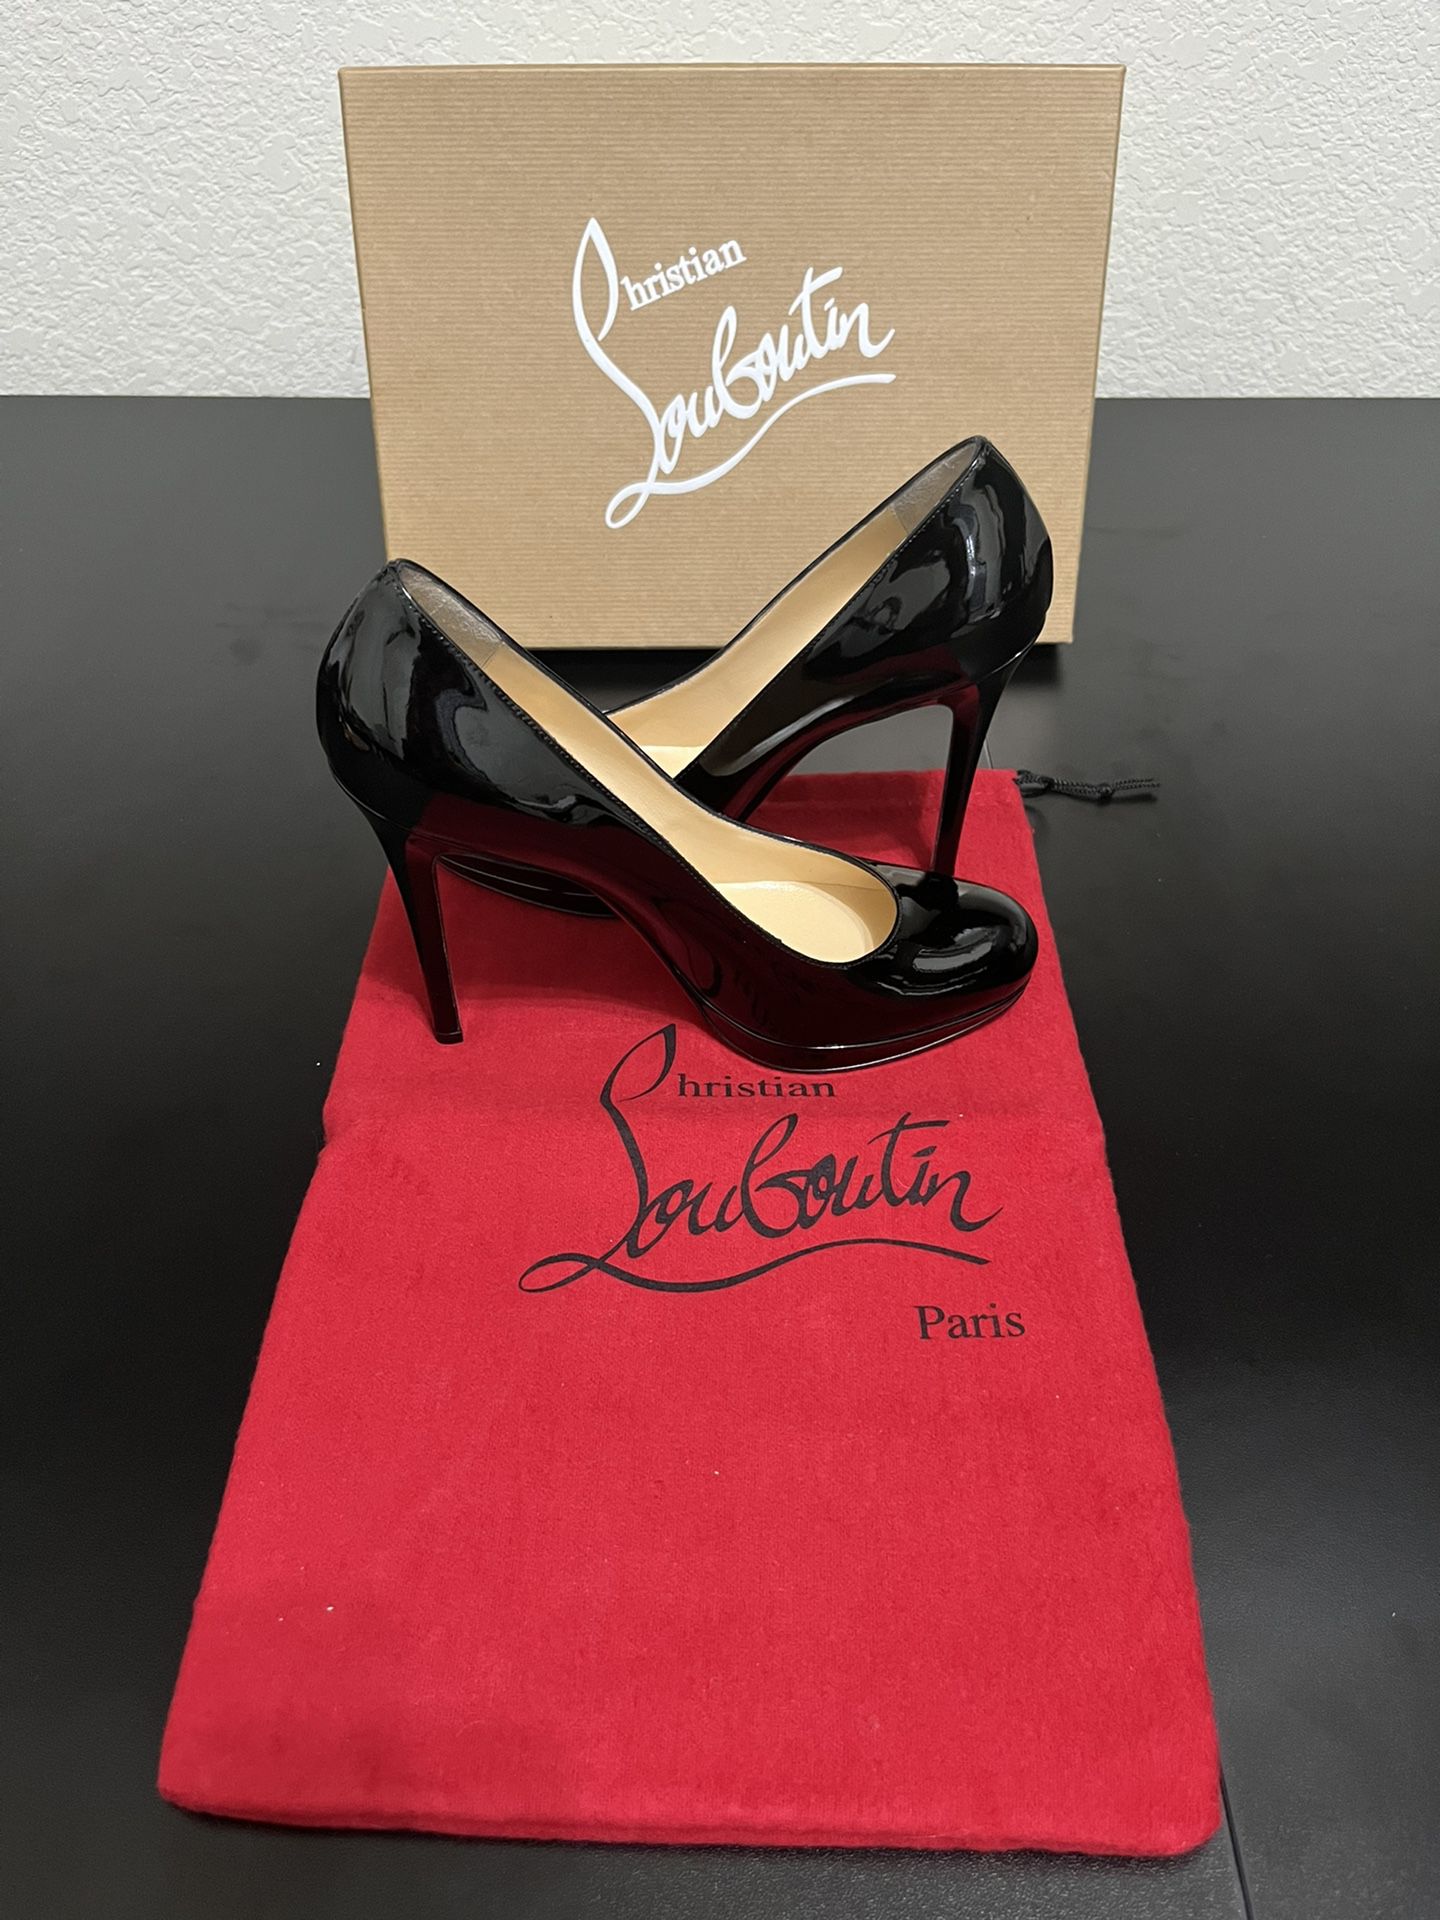 New In Box Discontinued Christian Louboutin Black New Simple Pump